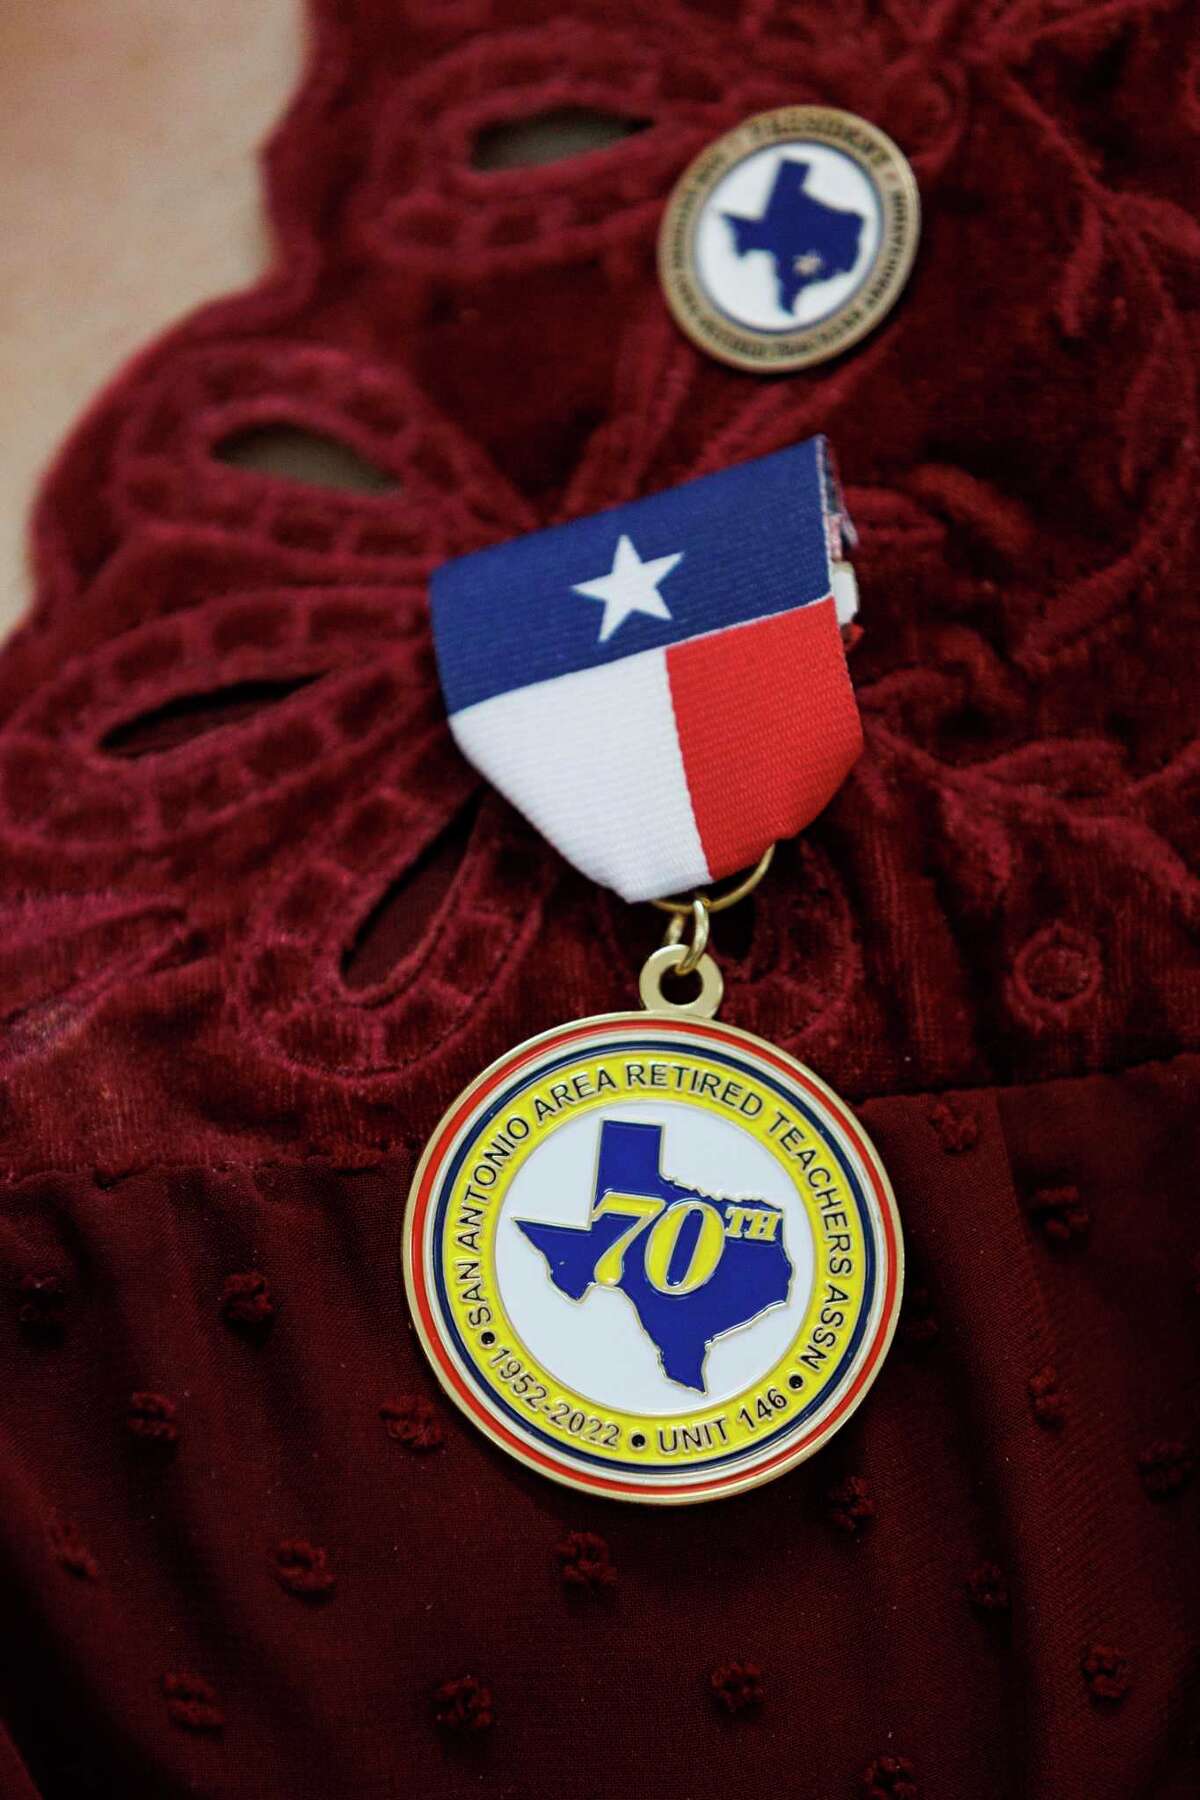 Dr. Norma Smith wears a medal signifying the 70th anniversary of the San Antonio Area Retired Teachers Association, a local chapter of the Texas Retired Teachers Association, during a member meeting at San Antonio Garden Center in San Antonio, Texas, Wednesday, Feb. 16, 2022.